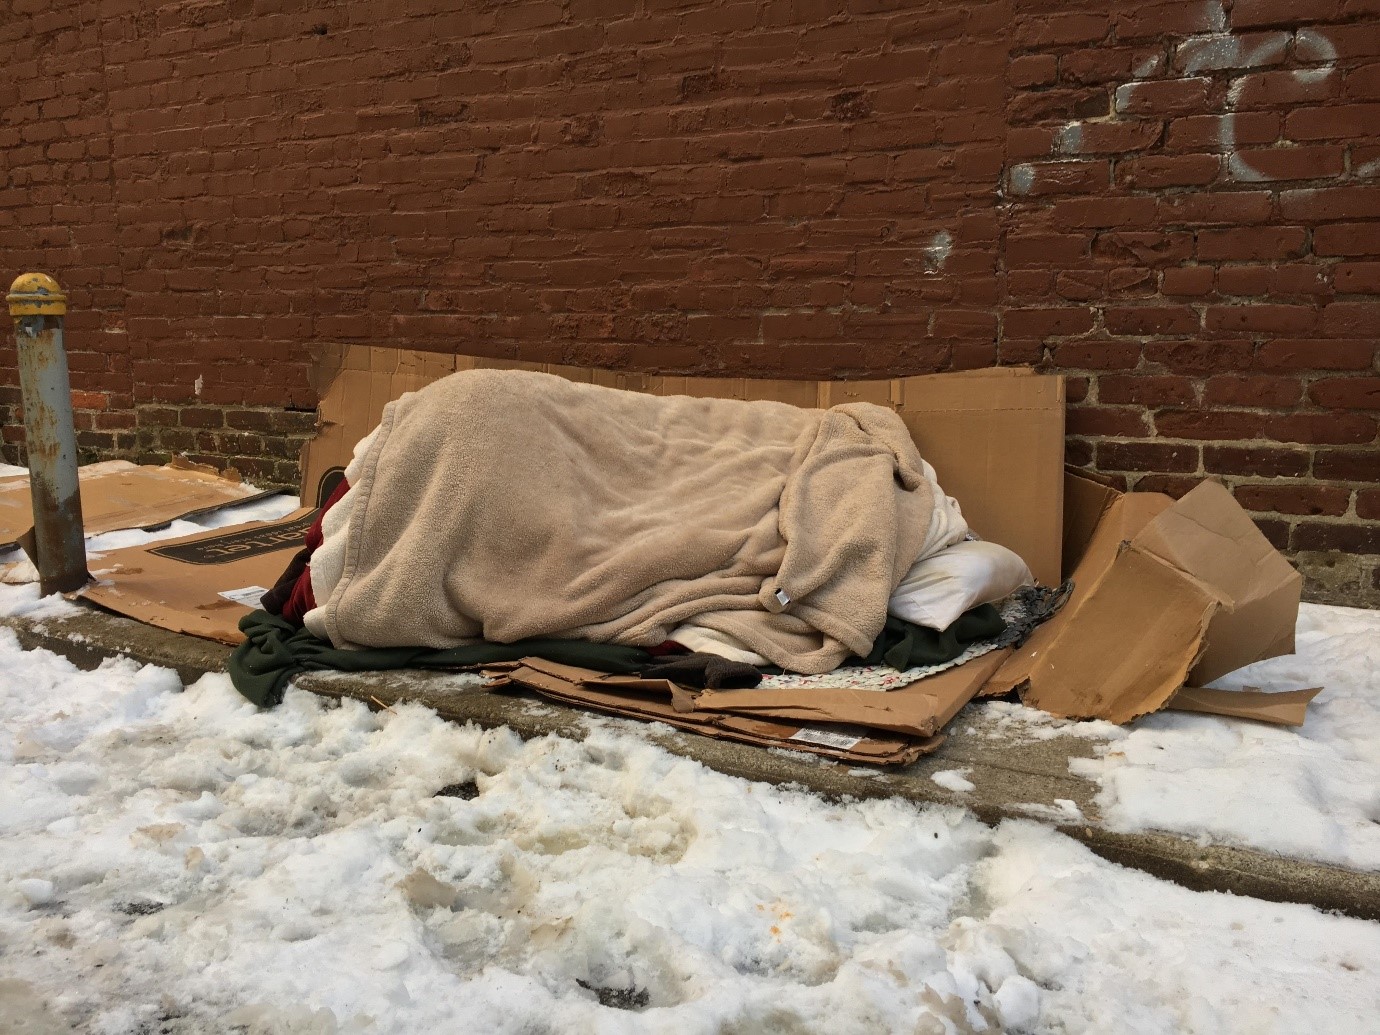 Photograph of a homeless person sleeping outside in the cold. Credit: Getty Image